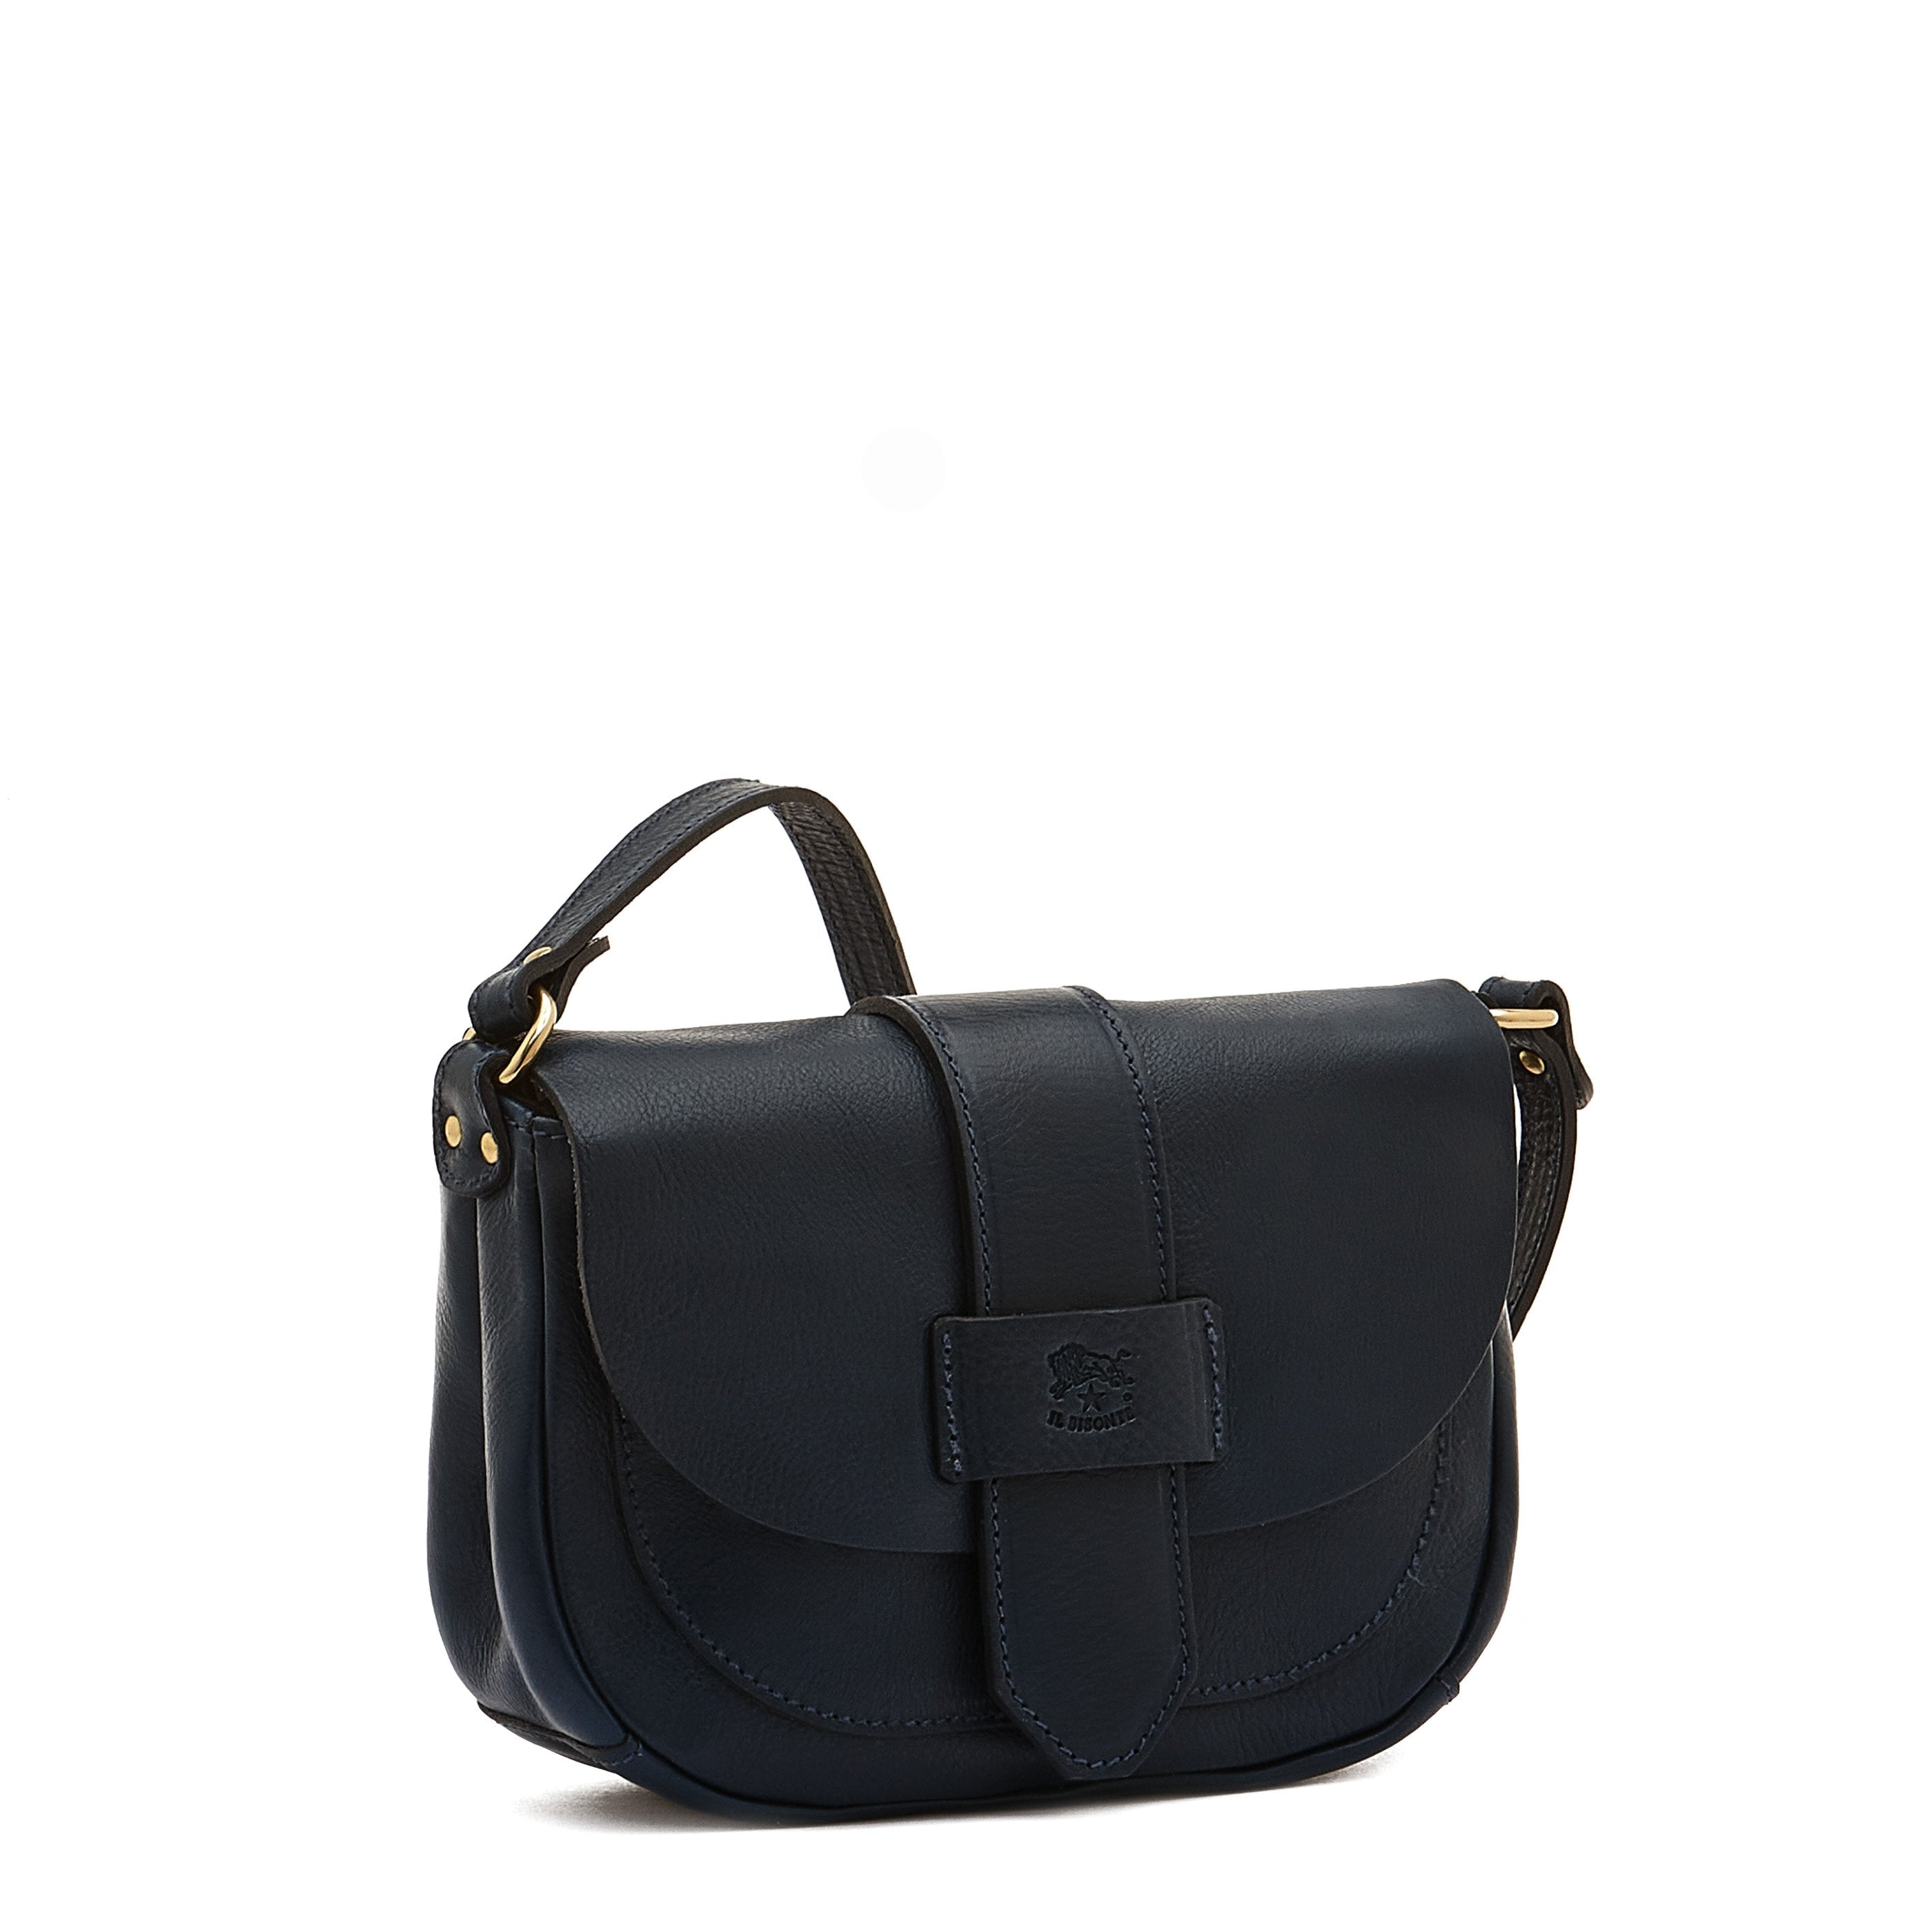 Dior And Shawn Crossbody Backpack Navy in Grained Calfskin with